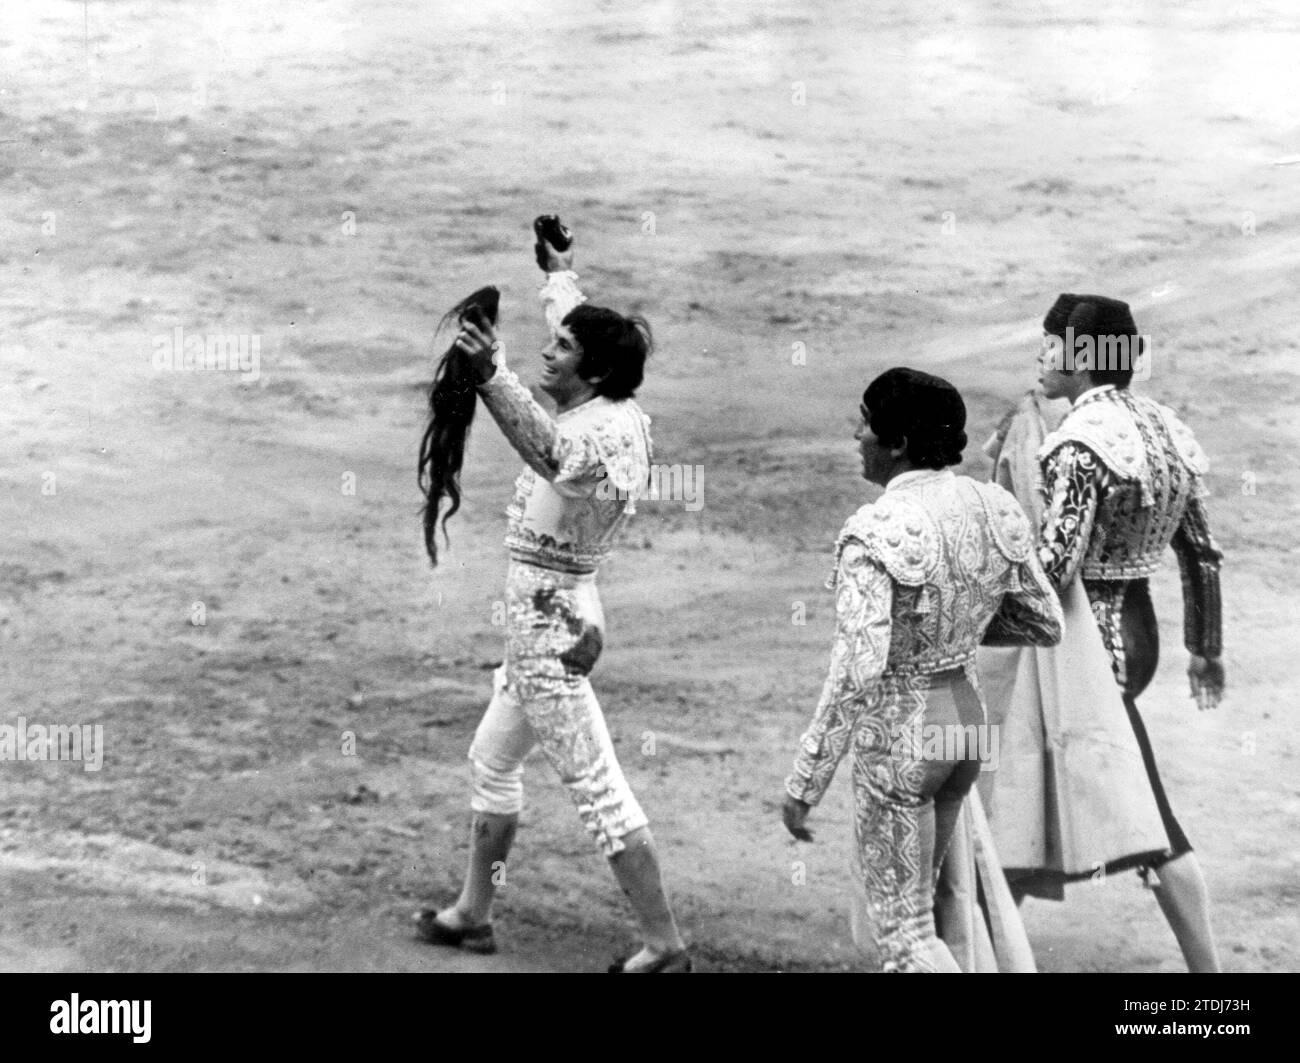 Madrid, 05/22/1972. Sebastián Palomo Linares returns to the ring with the controversial two ears and tail cut off in Las Ventas. Credit: Album / Archivo ABC Stock Photo